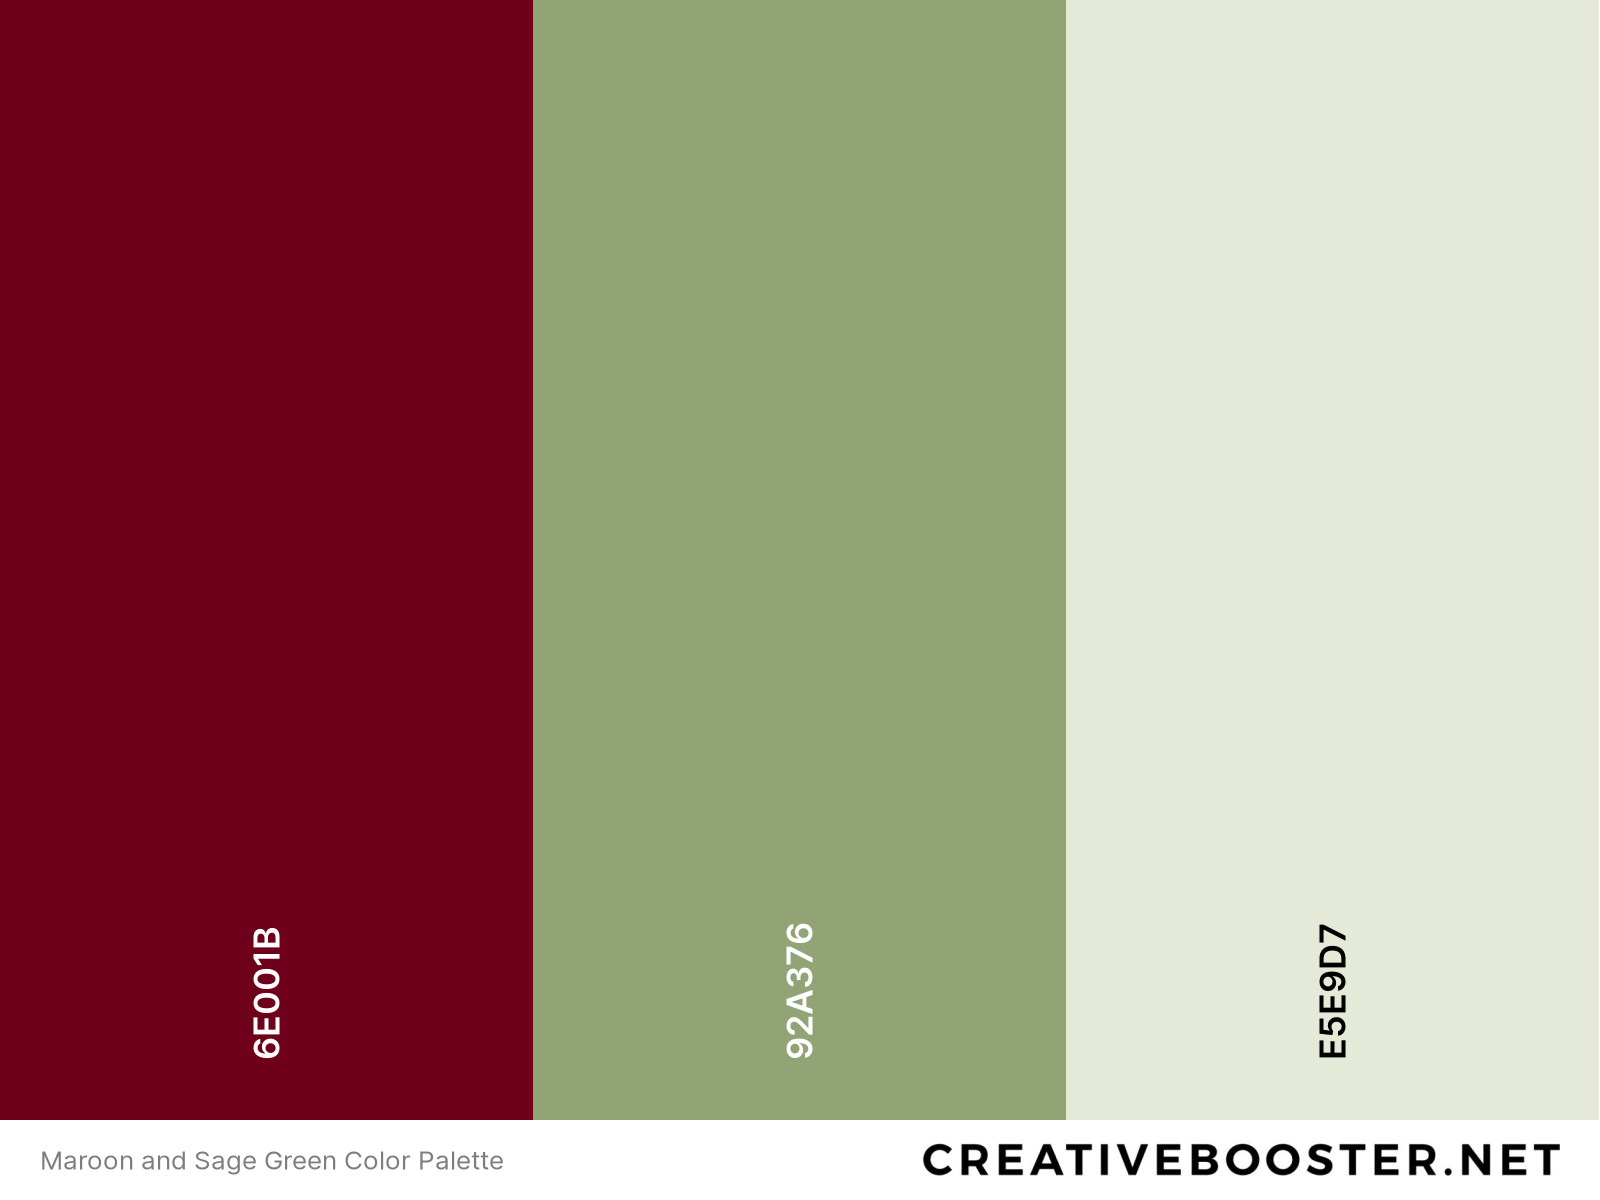 Maroon and Sage Green Color Palette